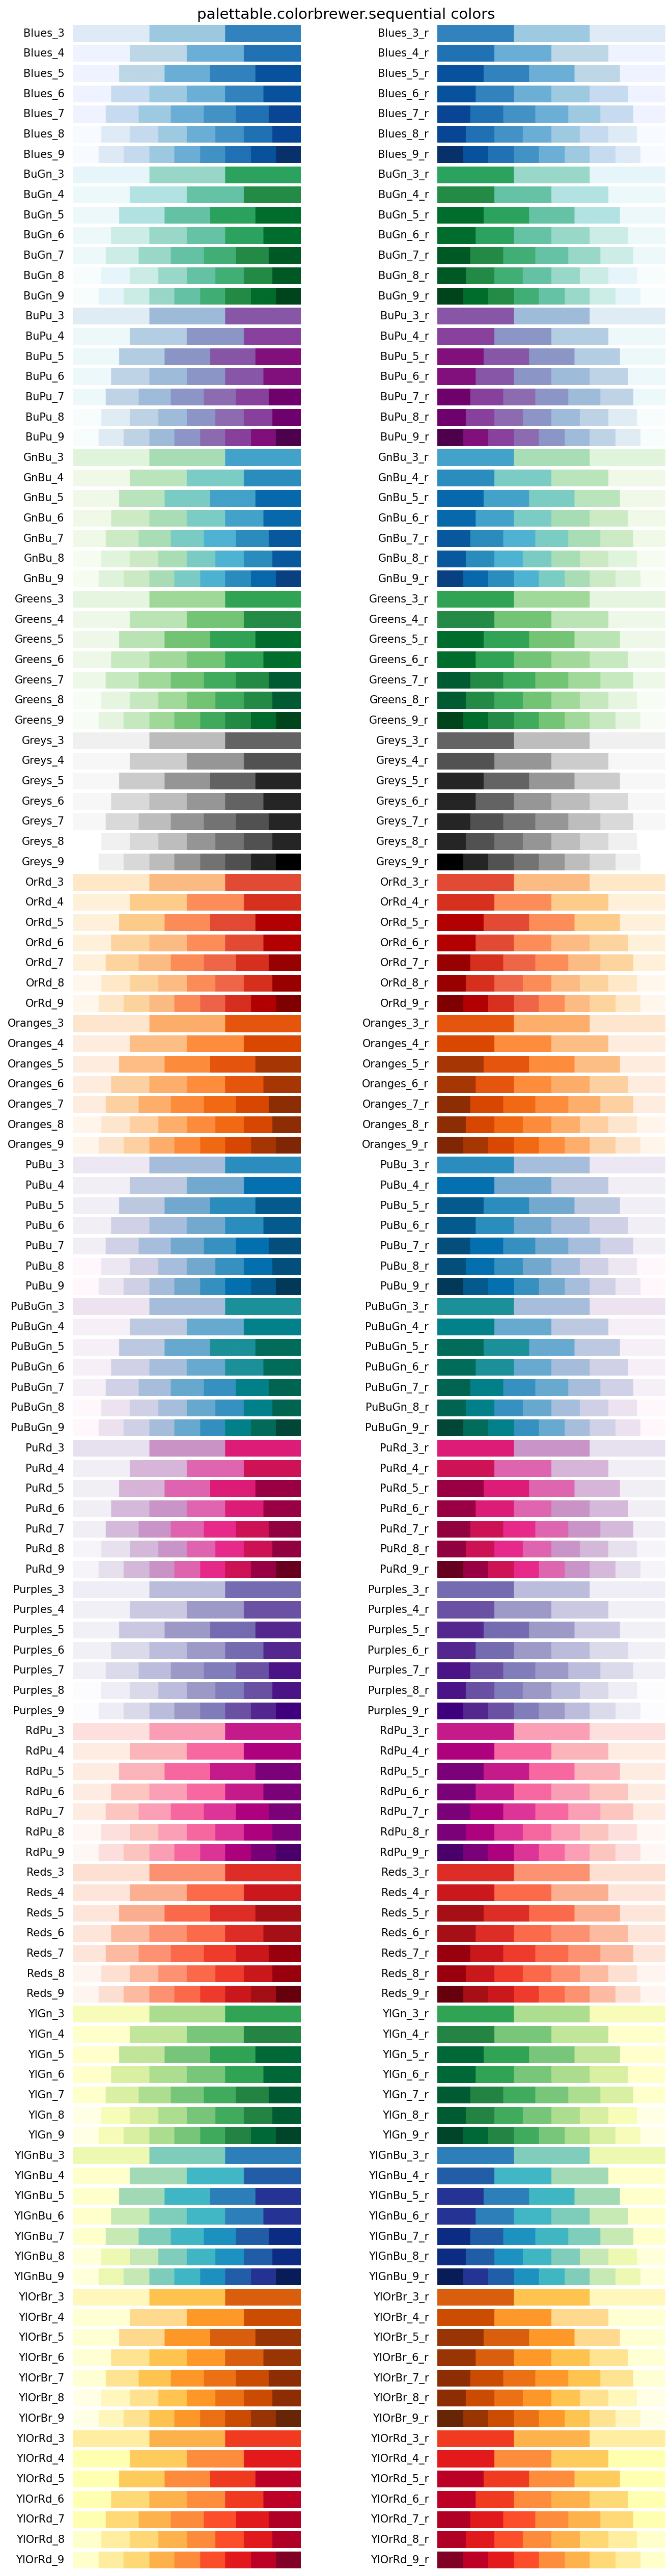 palettable_palettable.colorbrewer.sequential_colors.png